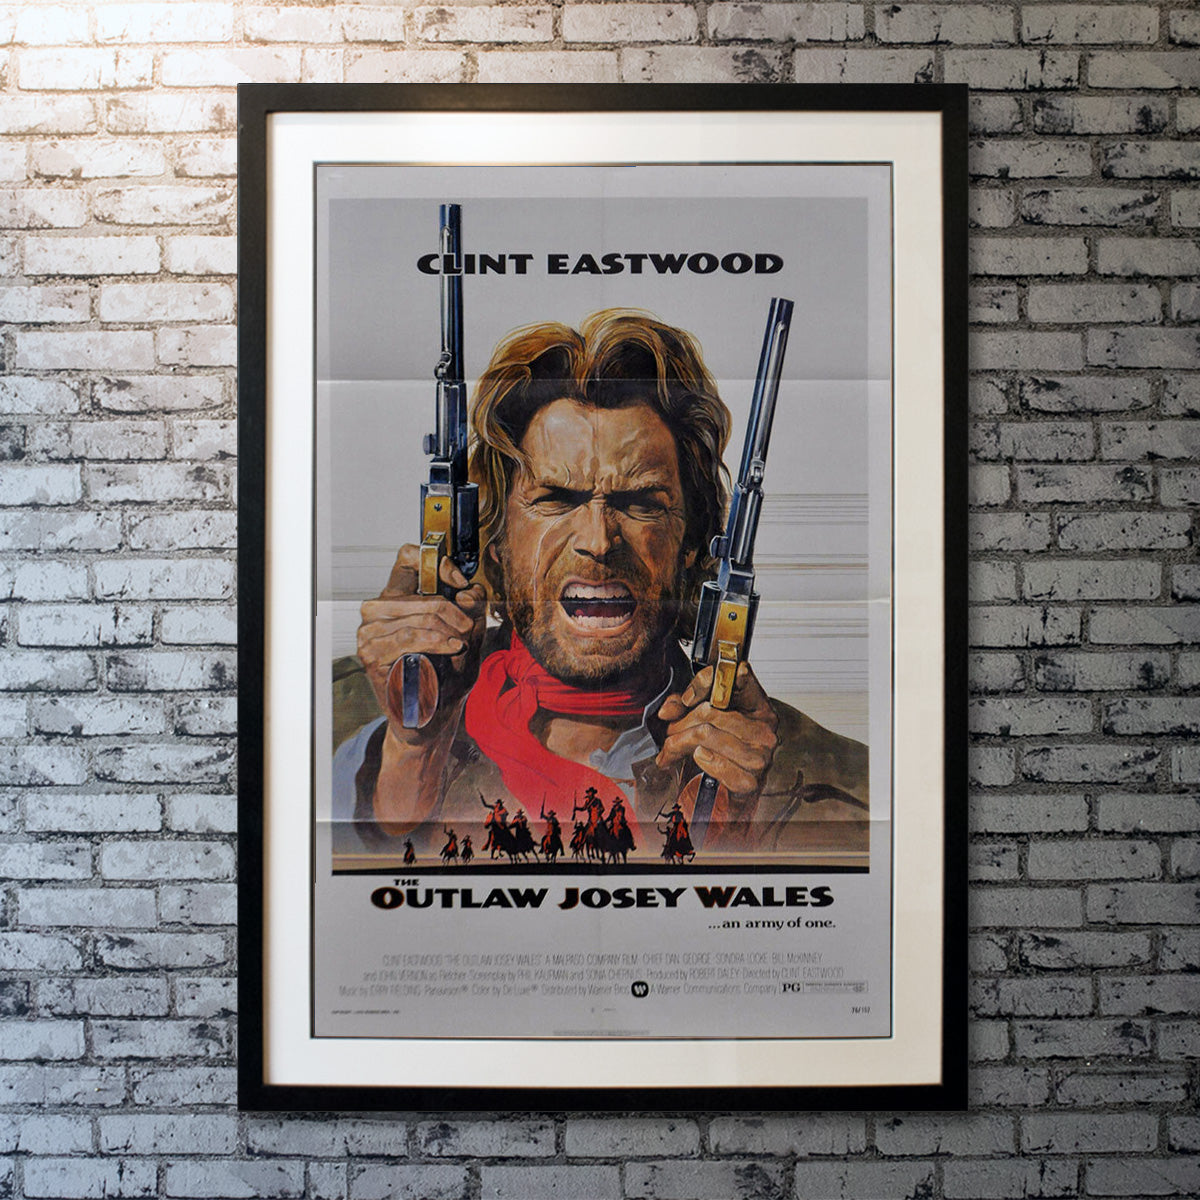 Outlaw Josey Wales, The (1976)